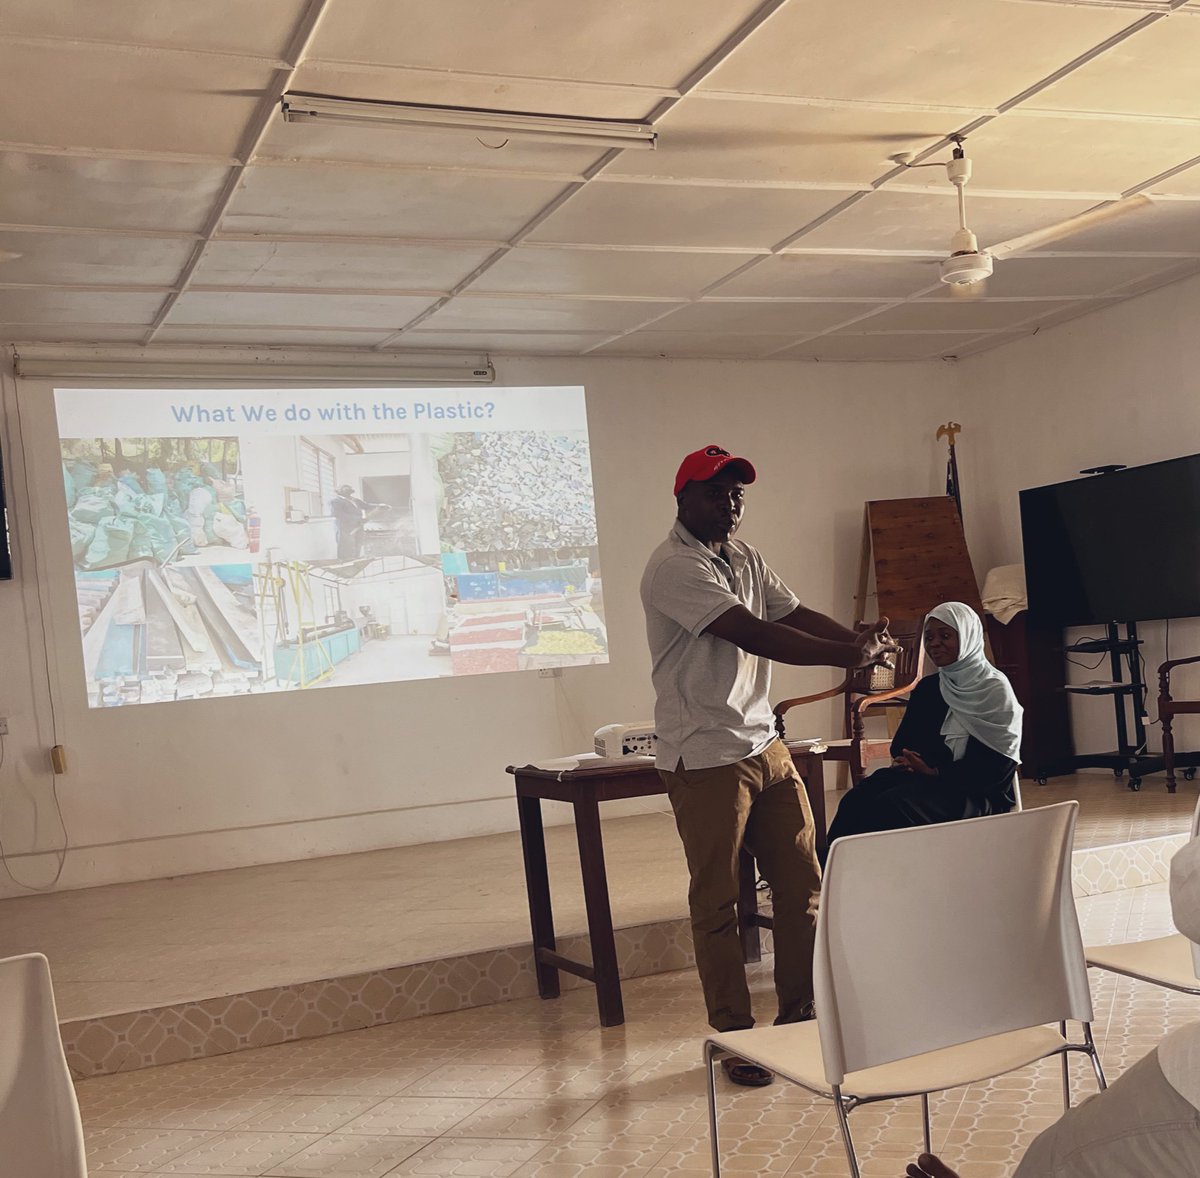 Asante @theflipflopi for inviting us to learn more about the #plasticrevolution in Lamu using community engagement, collections and the introduction of a brand new recycling centre. It all starts with education and partnership and the community here is keen for both #plasticfree